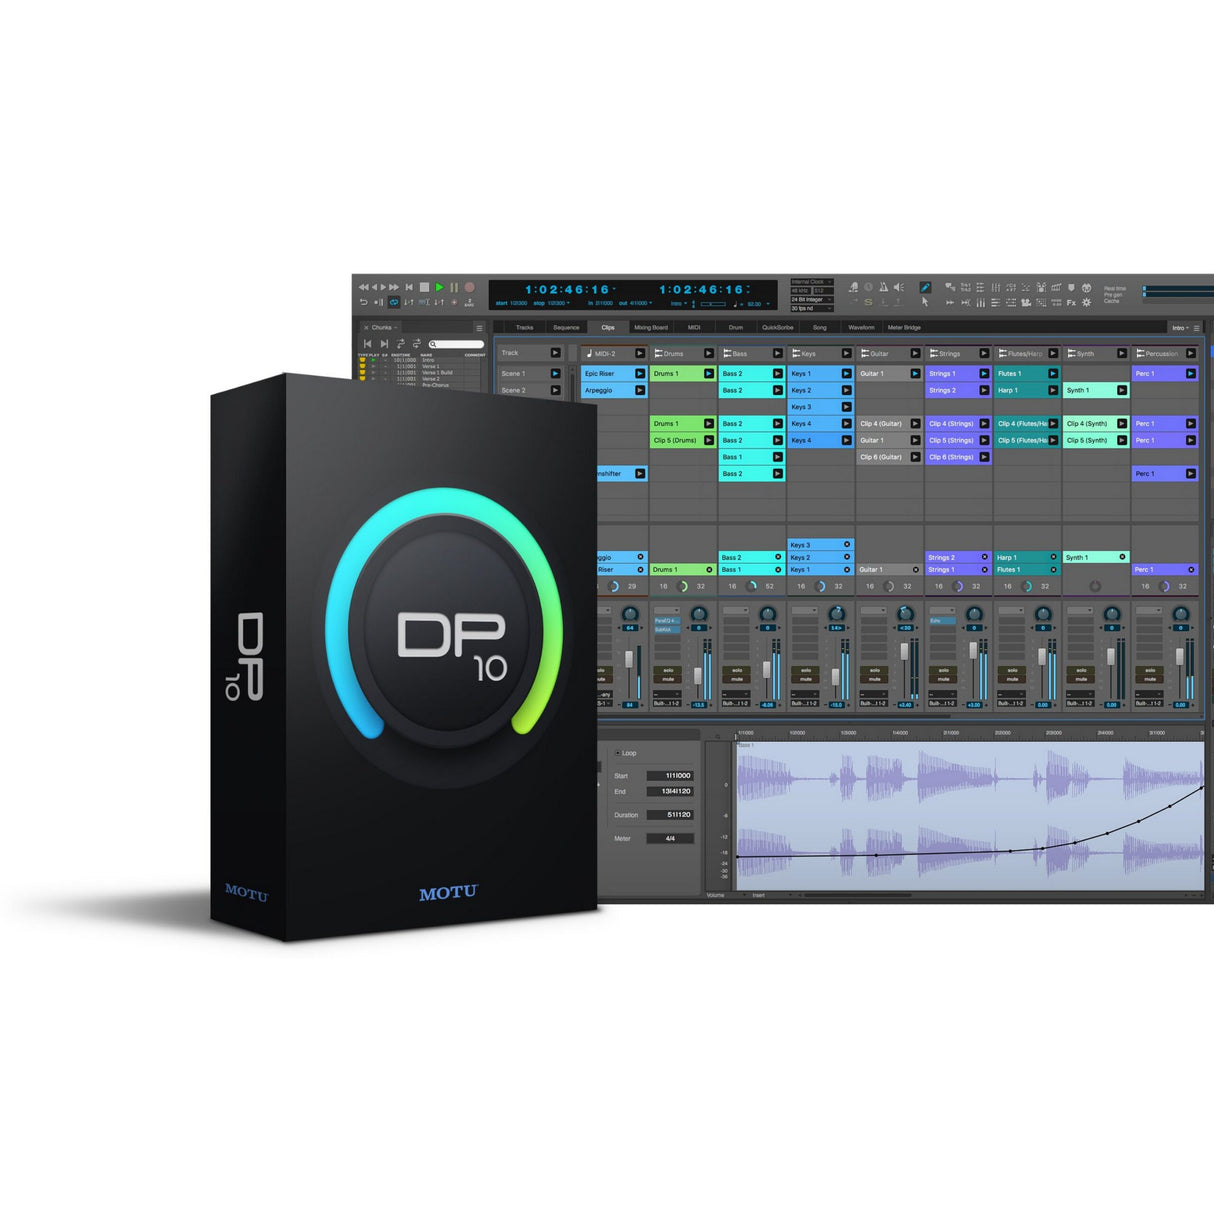 MOTU DP10 Academic, Audio Workstation Software with MIDI Sequencing